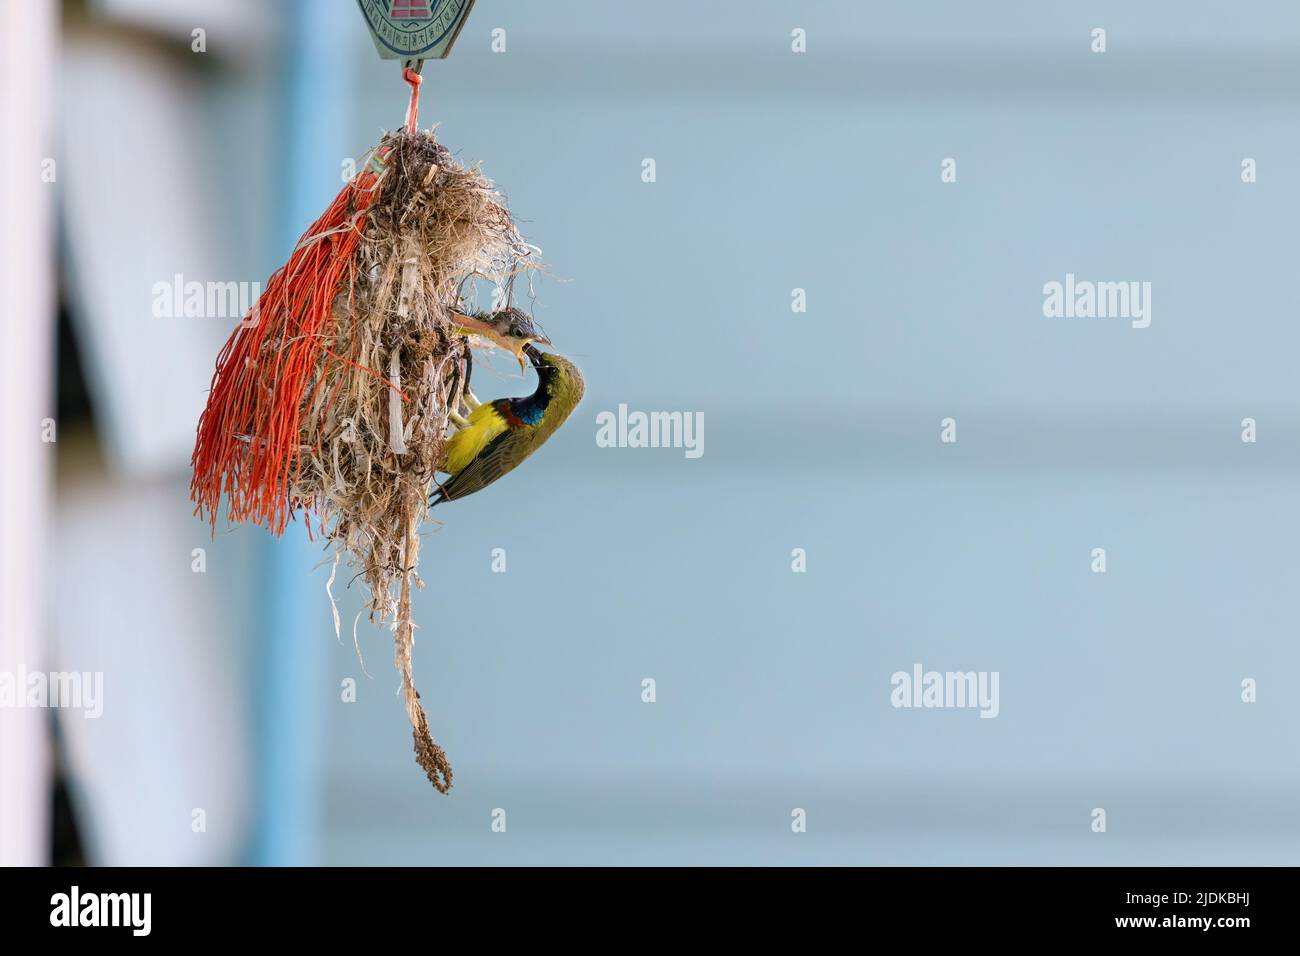 Close-up Olive-backed sunbird is feeding a baby in the nest with copy space. Stock Photo